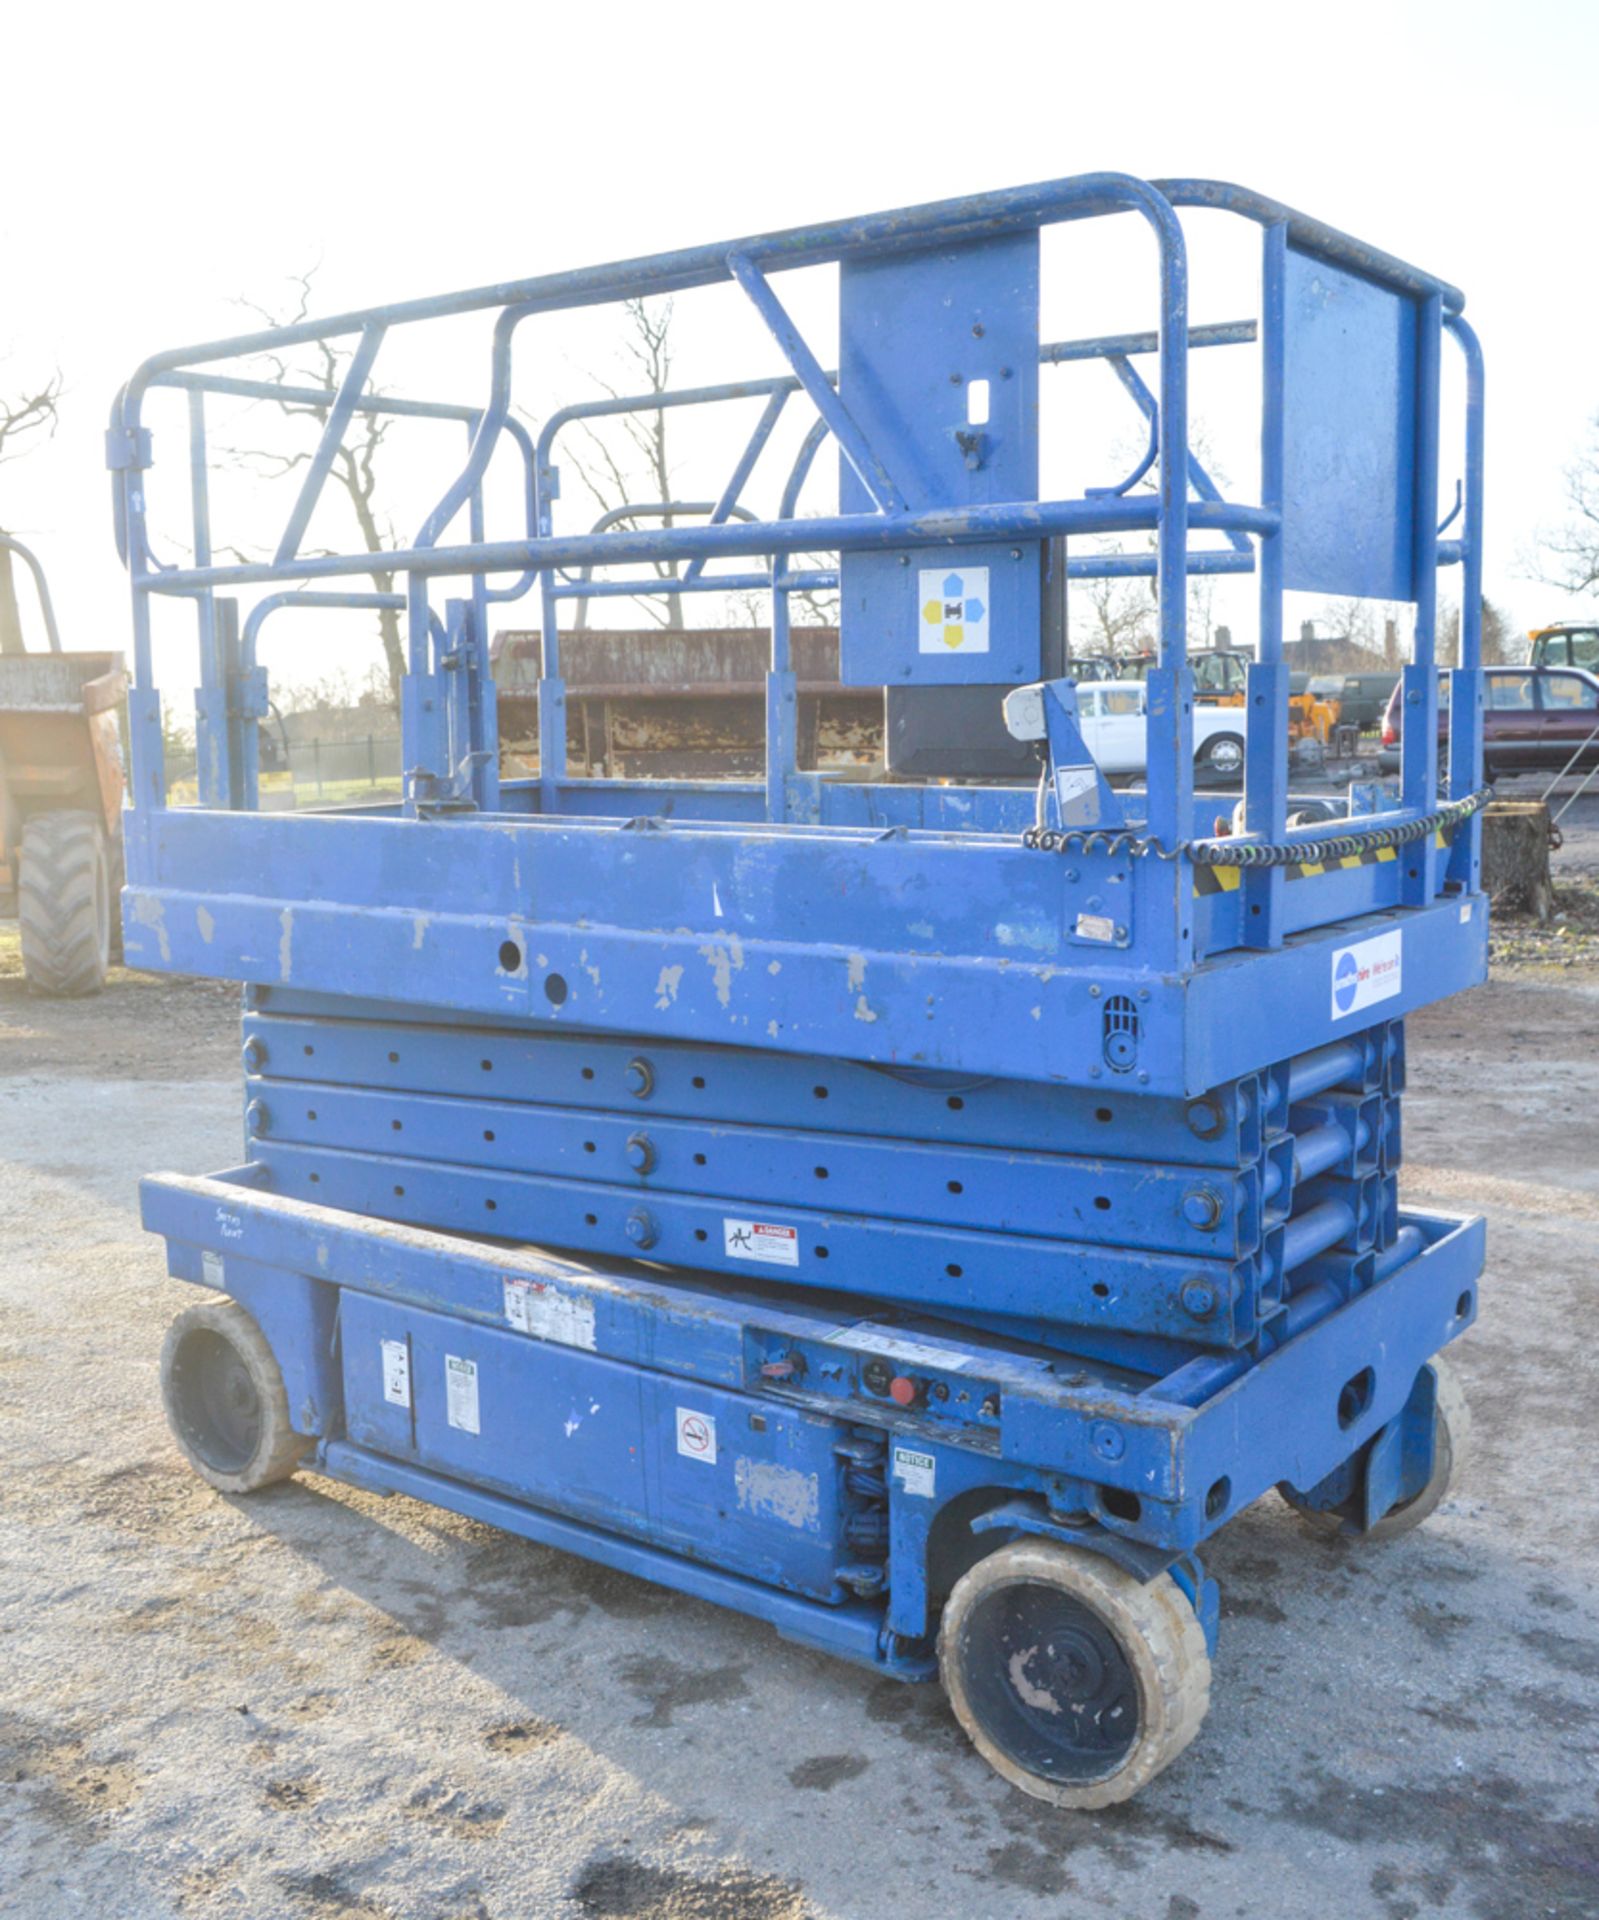 Genie Lift GS2646 26 ft battery election scissor lift access platform Year: 1998 S/N: 3659 - Image 2 of 5